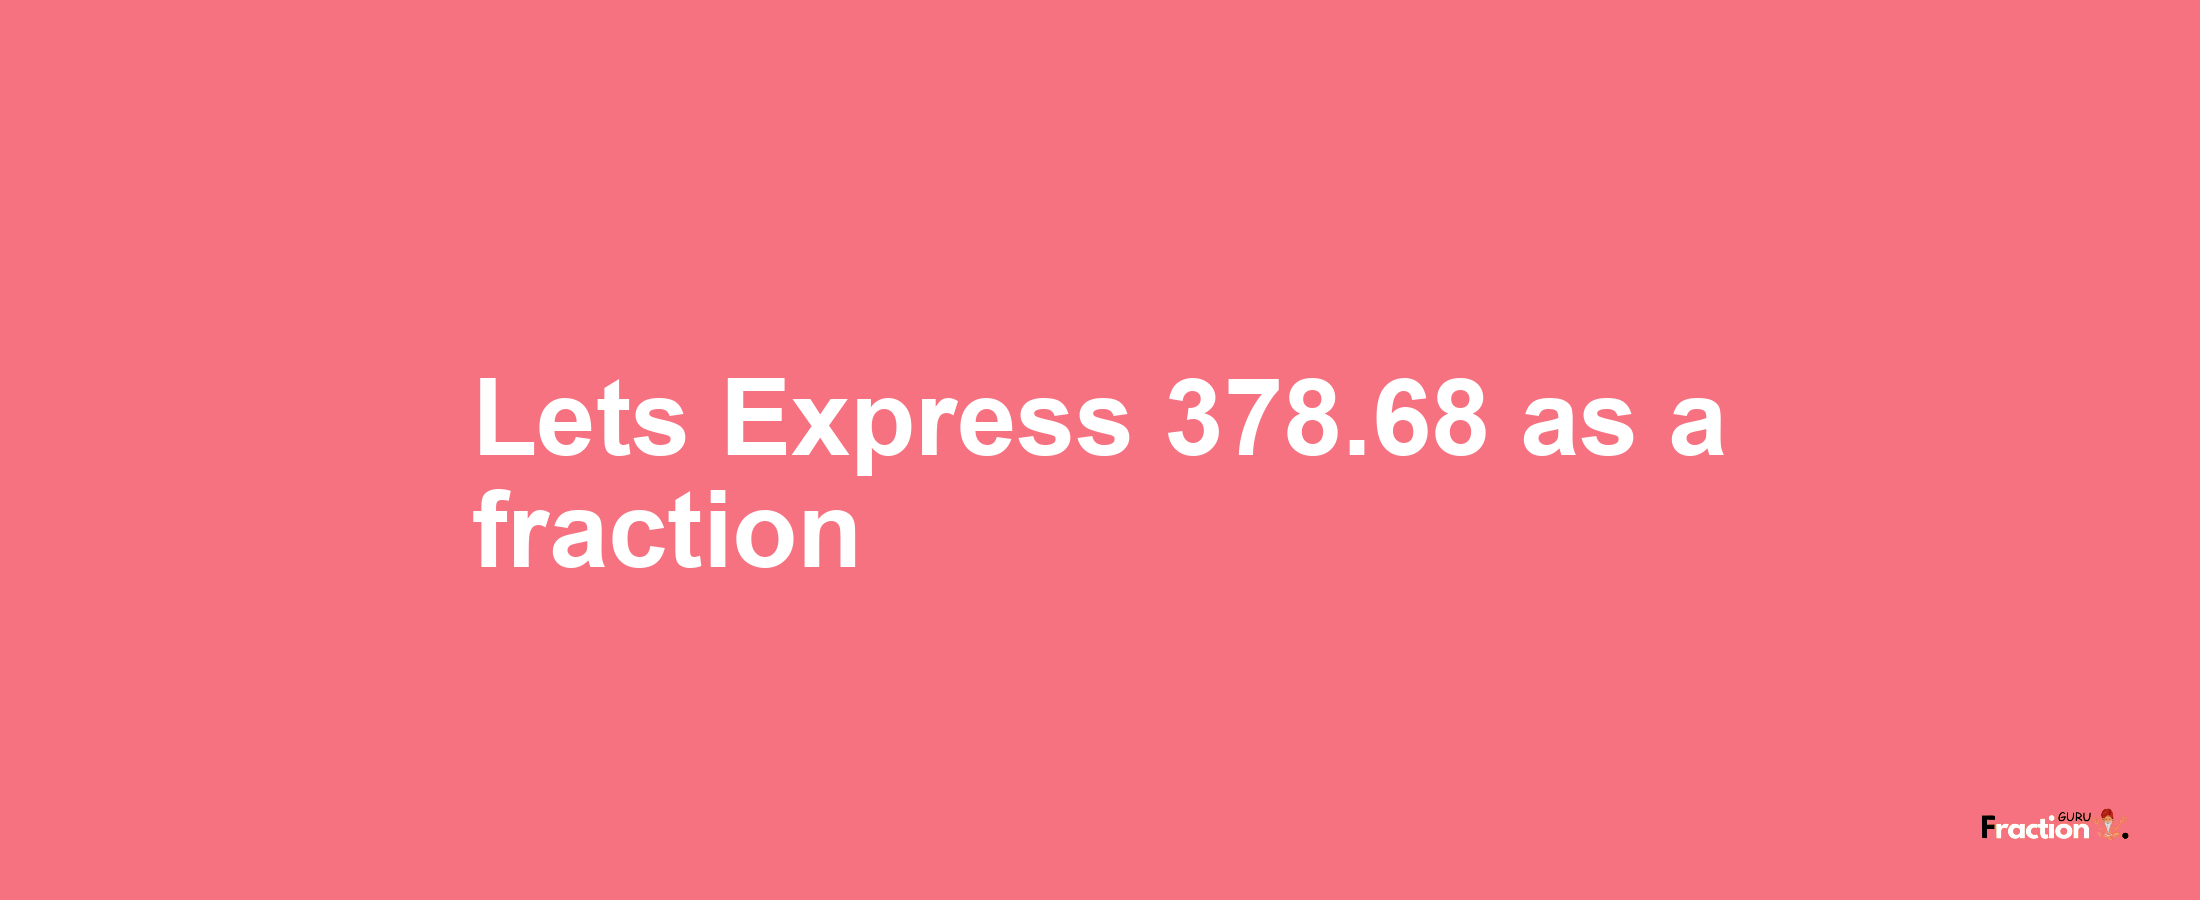 Lets Express 378.68 as afraction